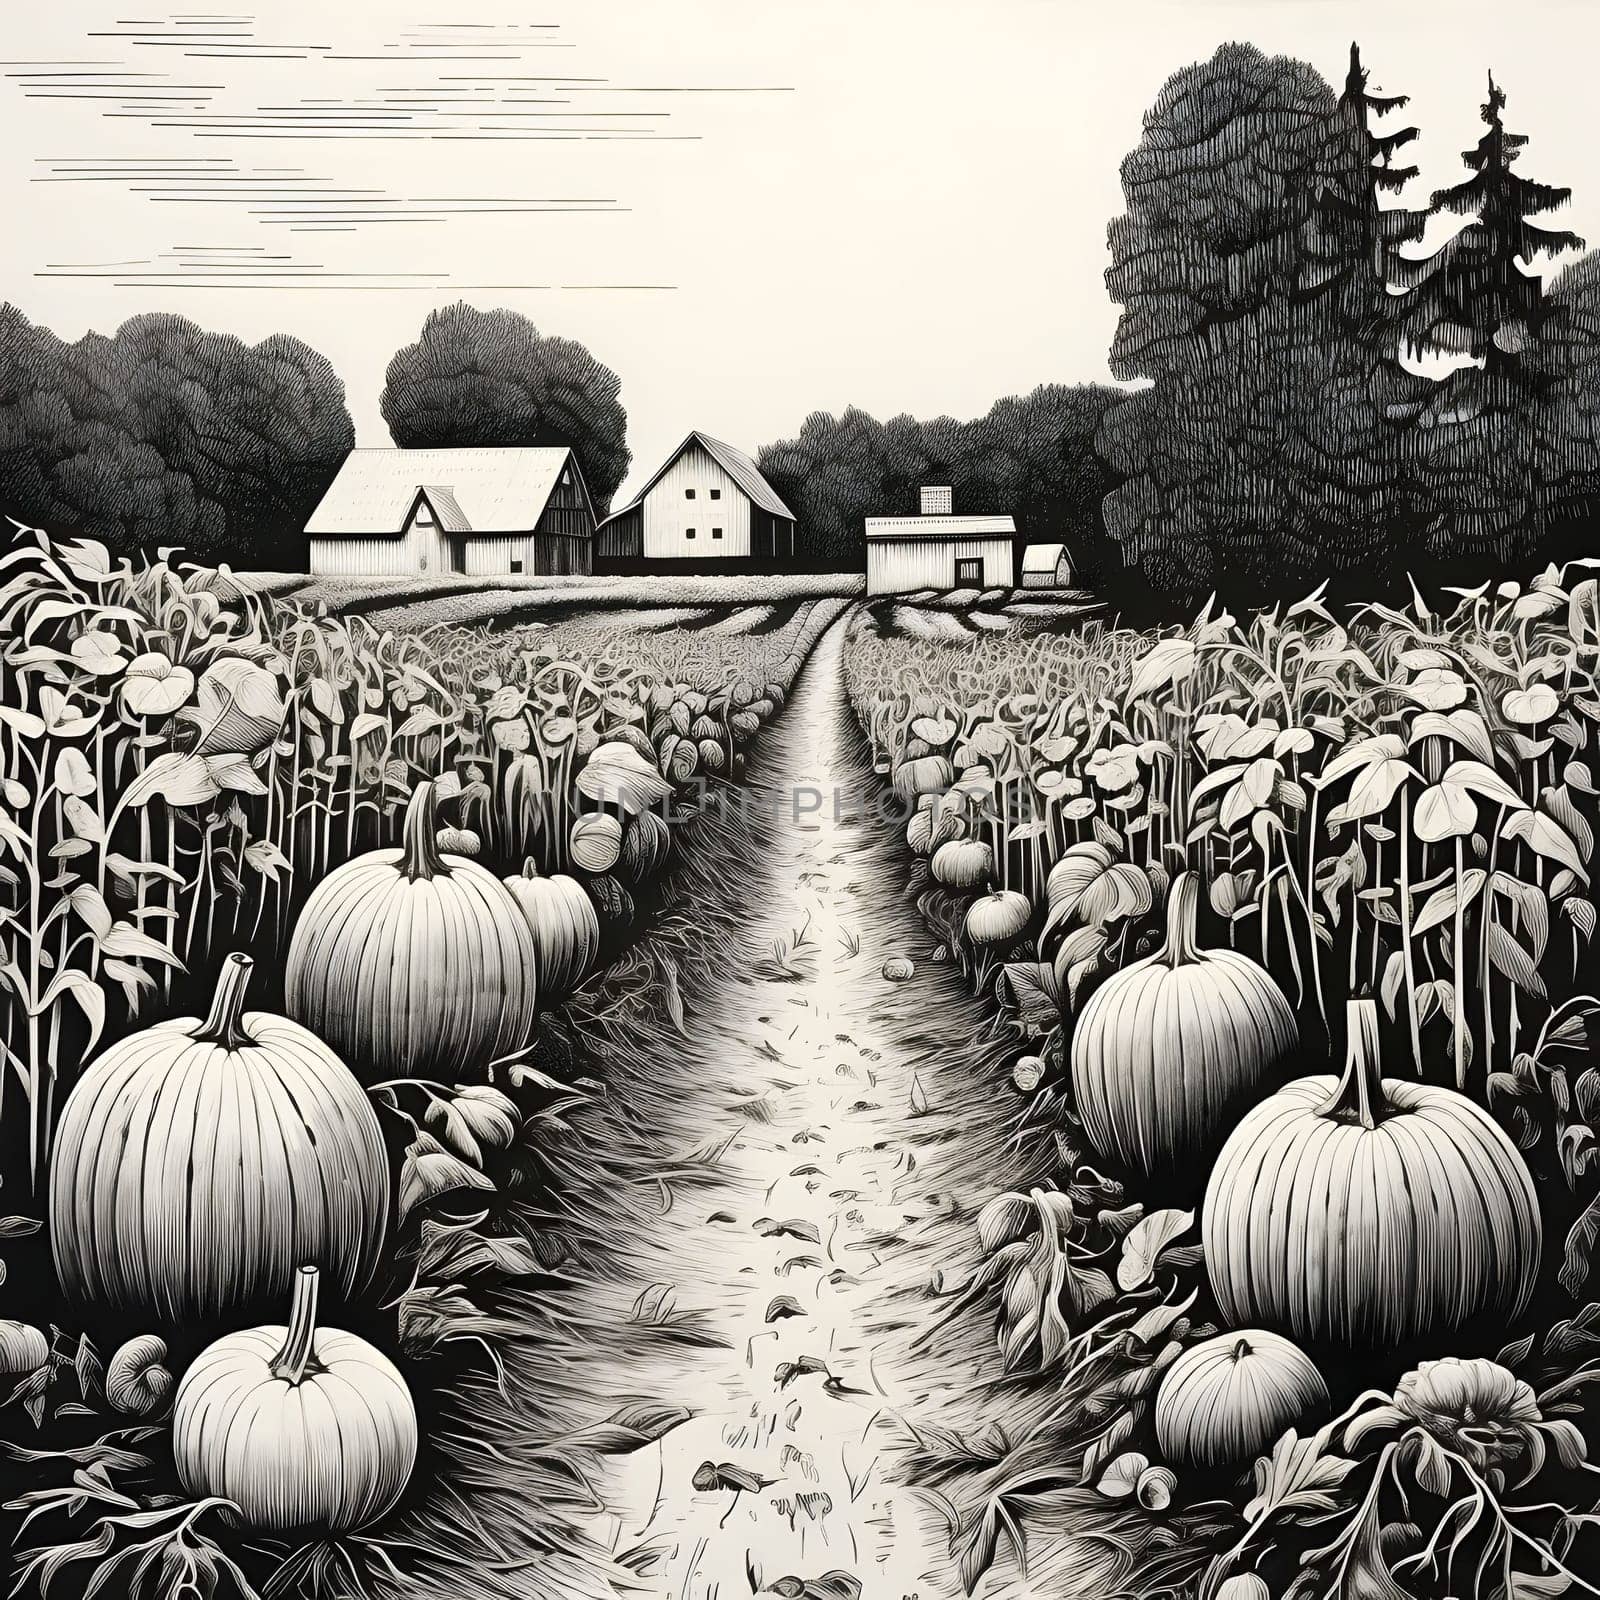 pumpkin field, shriveled trees and farm. Pumpkin as a dish of thanksgiving for the harvest. by ThemesS